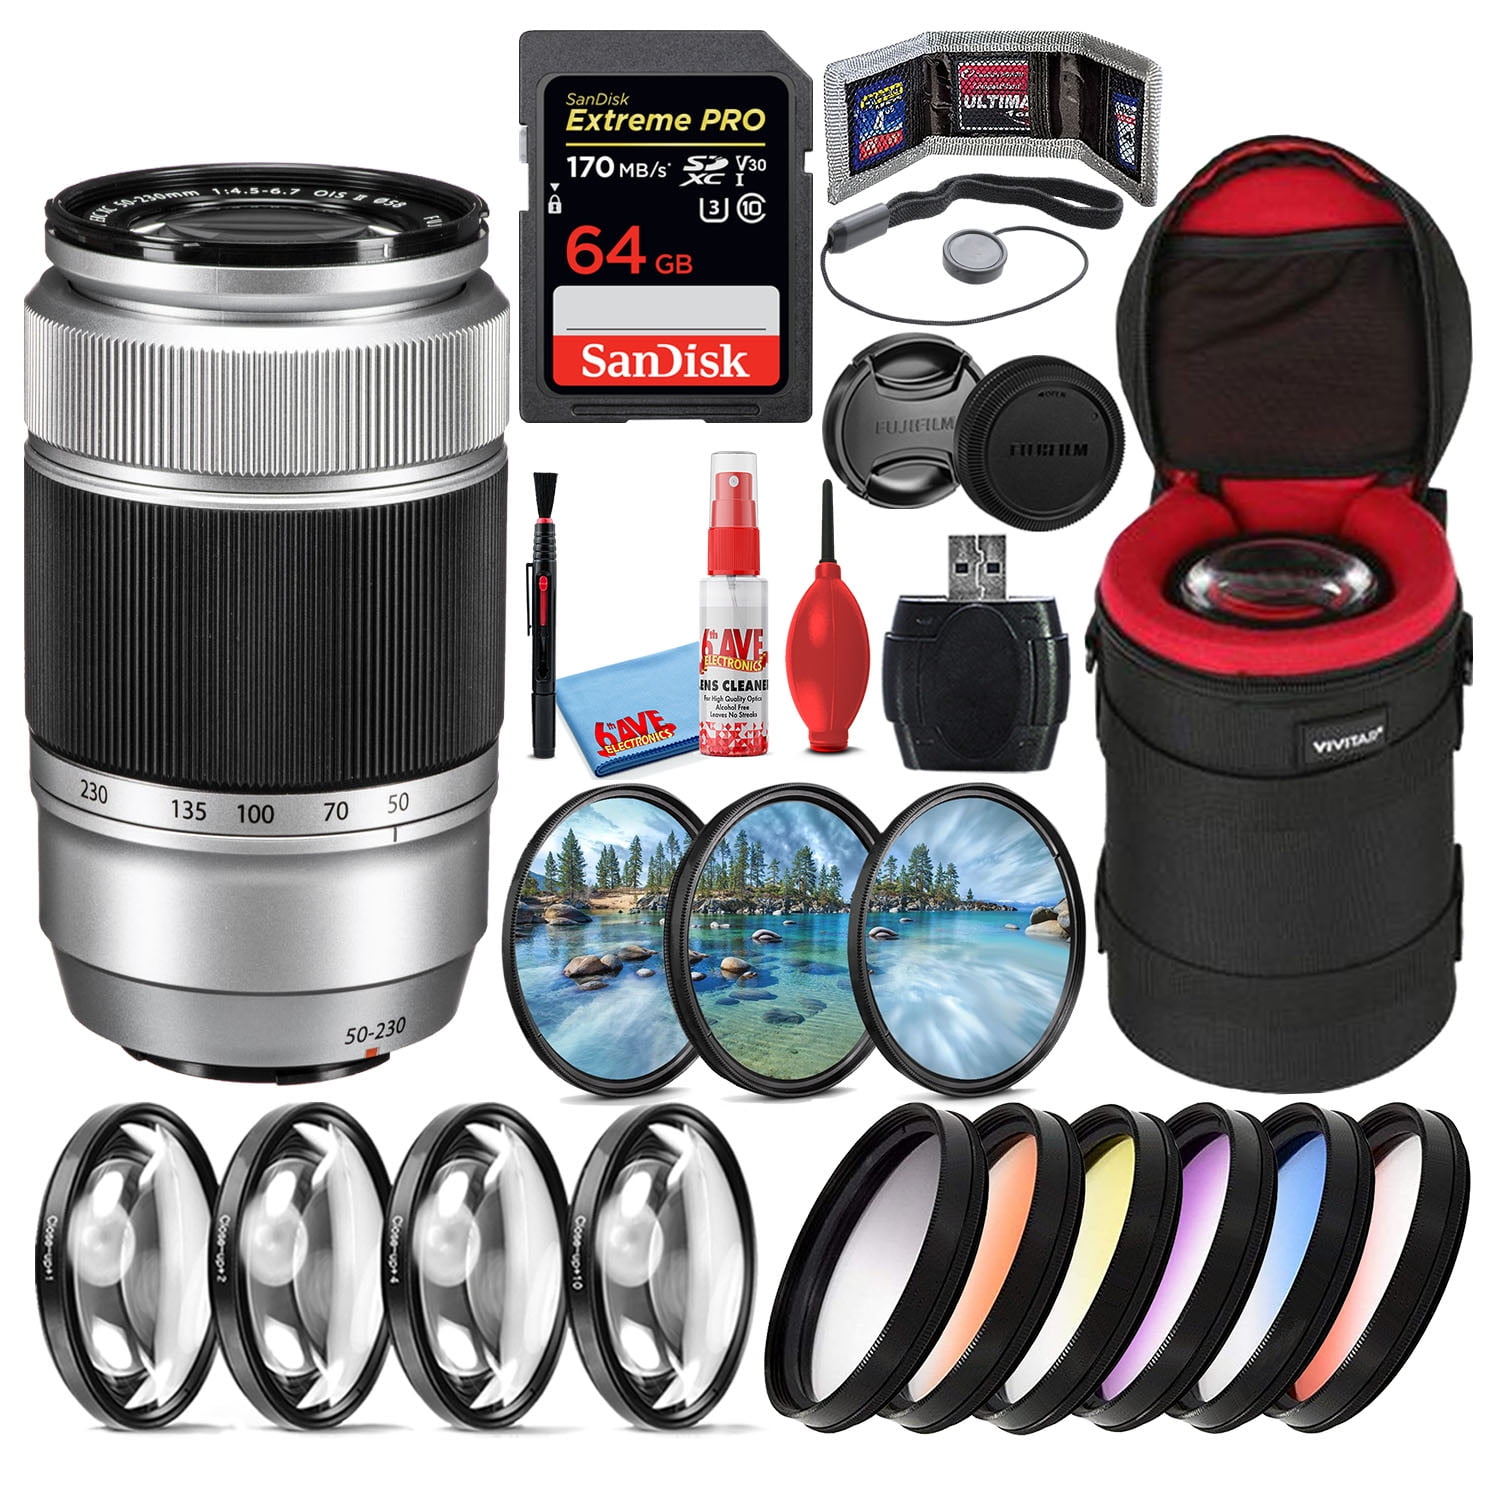 Fujifilm Fujinon XC 50-230mm f/4.5-6.7 OIS II Telephoto Lens (Silver)  (16460795) Bundle with SanDisk 64GB Extreme PRO SD Card + Close-Up Filters  +